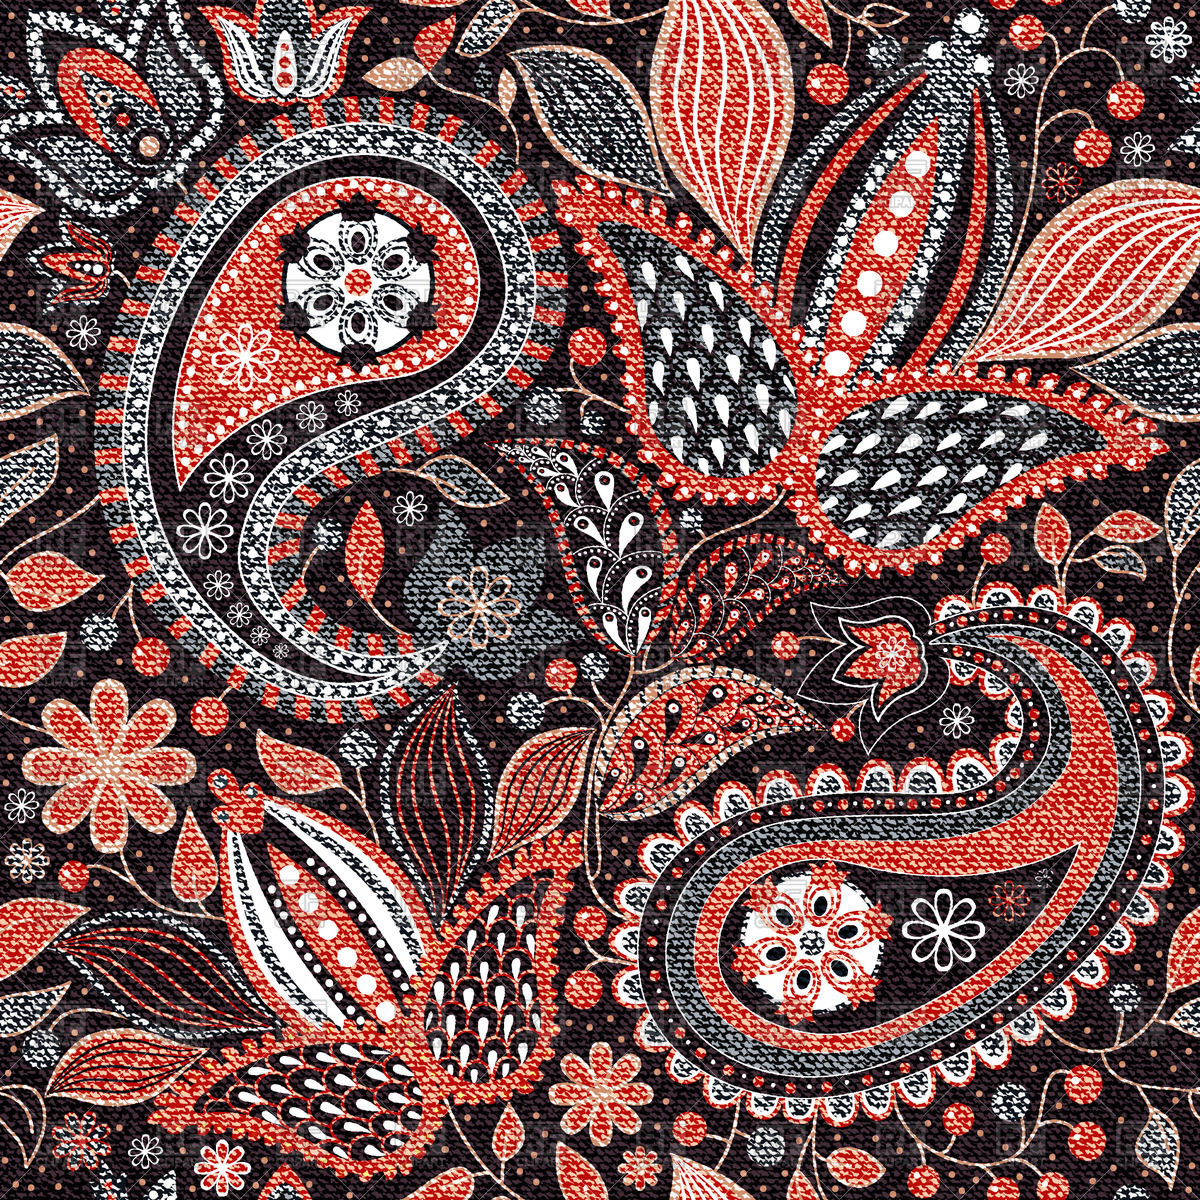 Red Paisley Seamless Pattern With Flowers 56708 Download Royalty